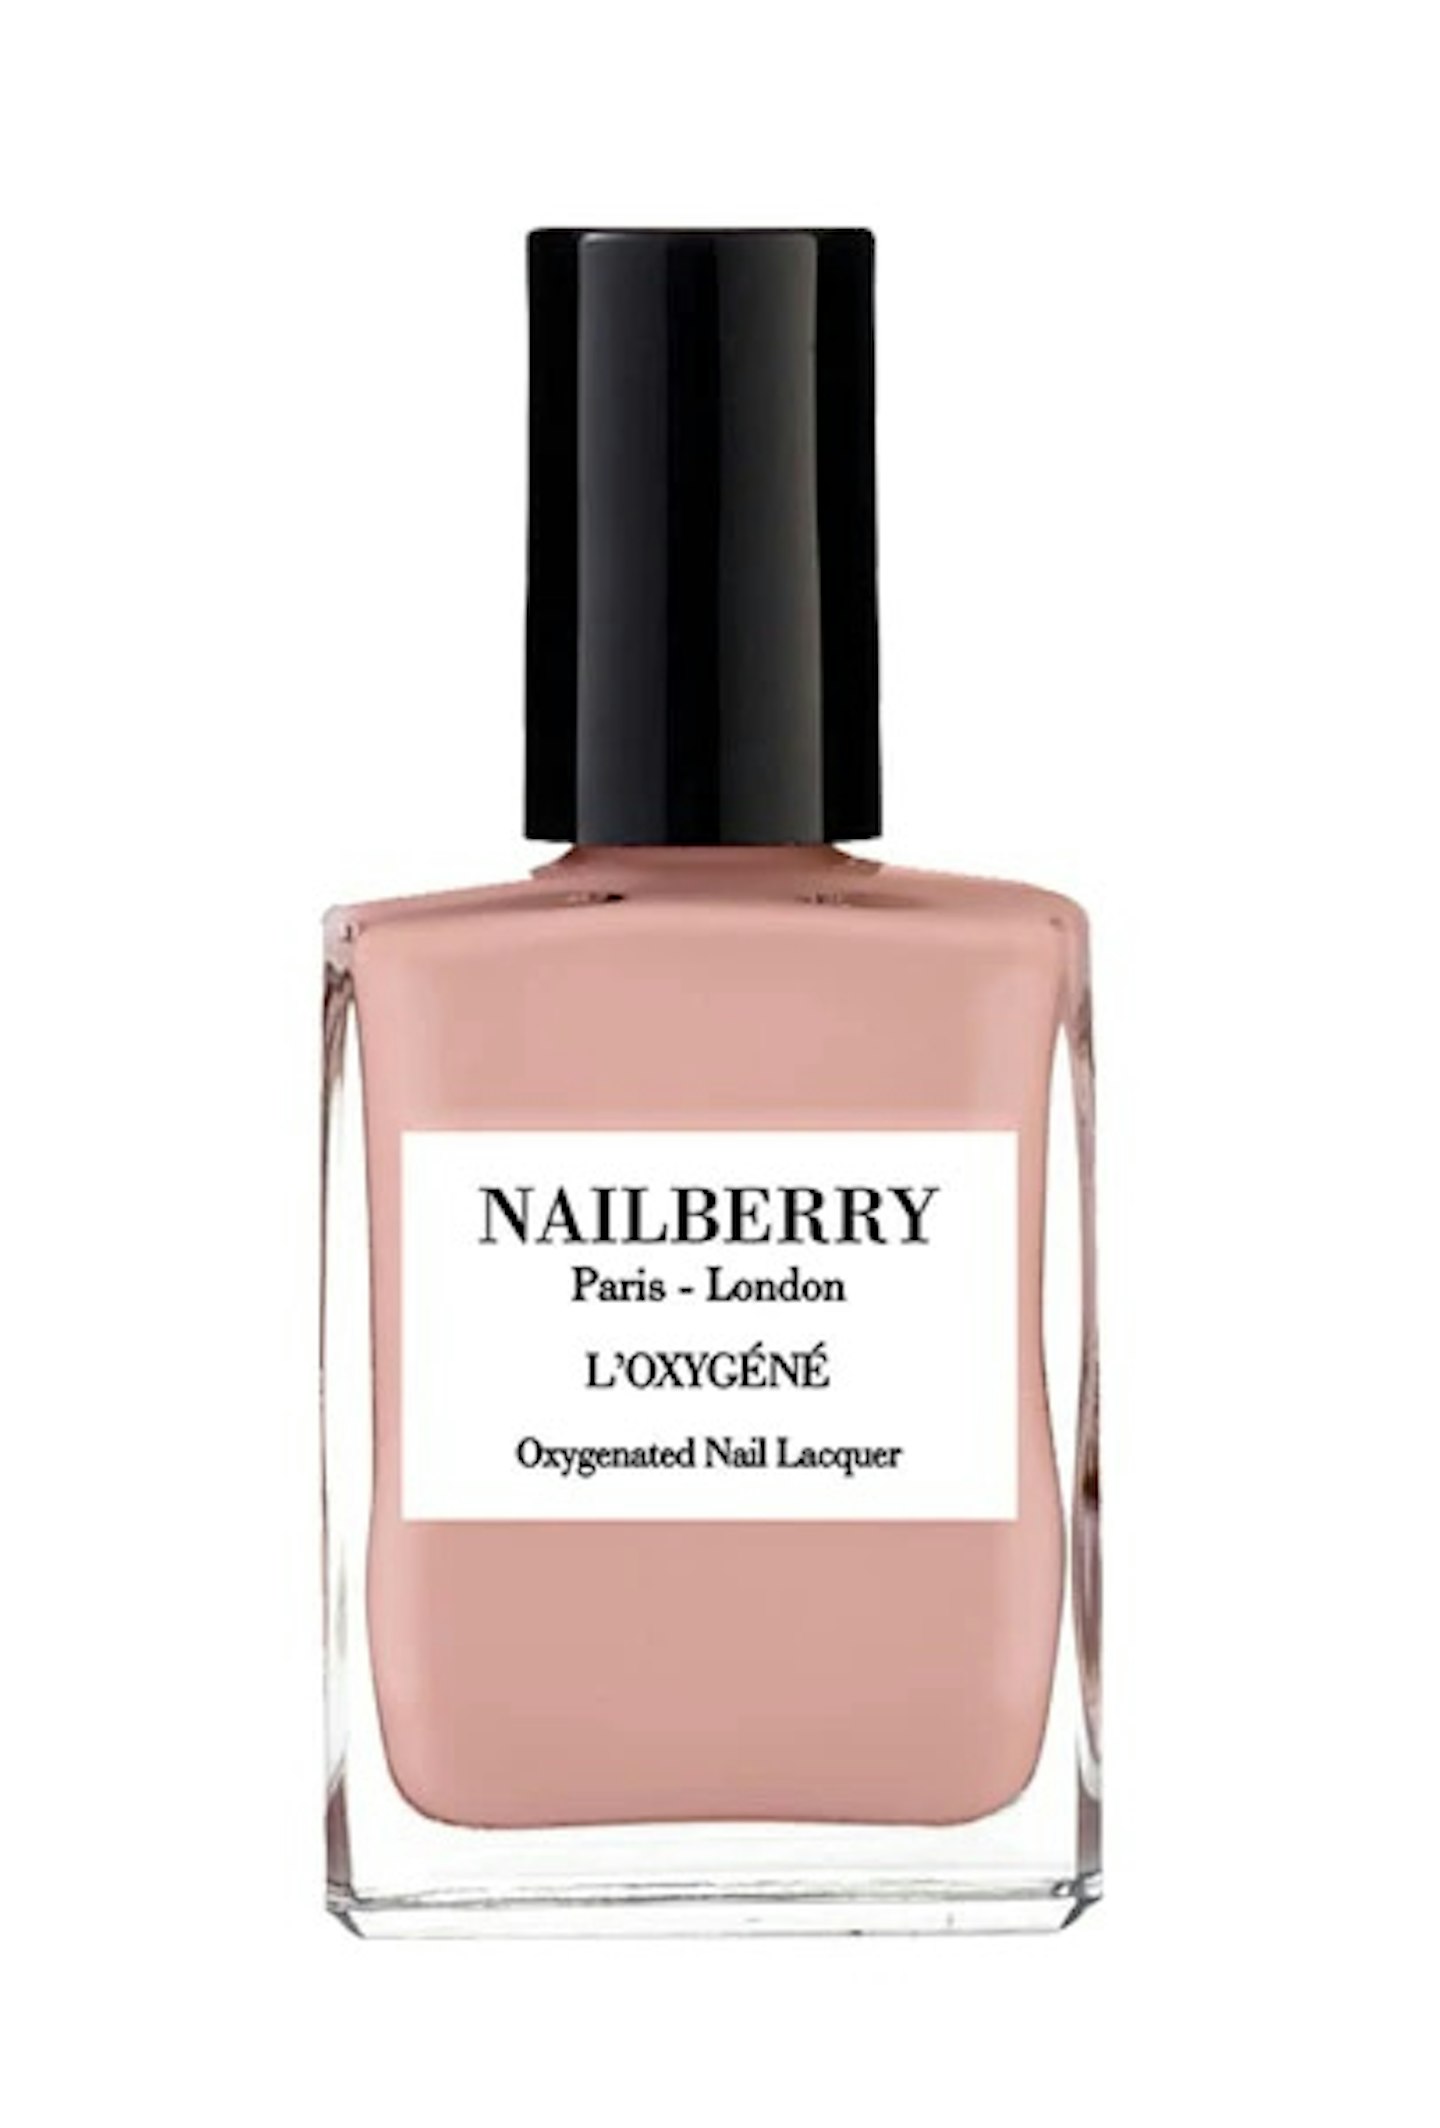 Nailberry L'Oxygen Oxygenated Nail Lacquer